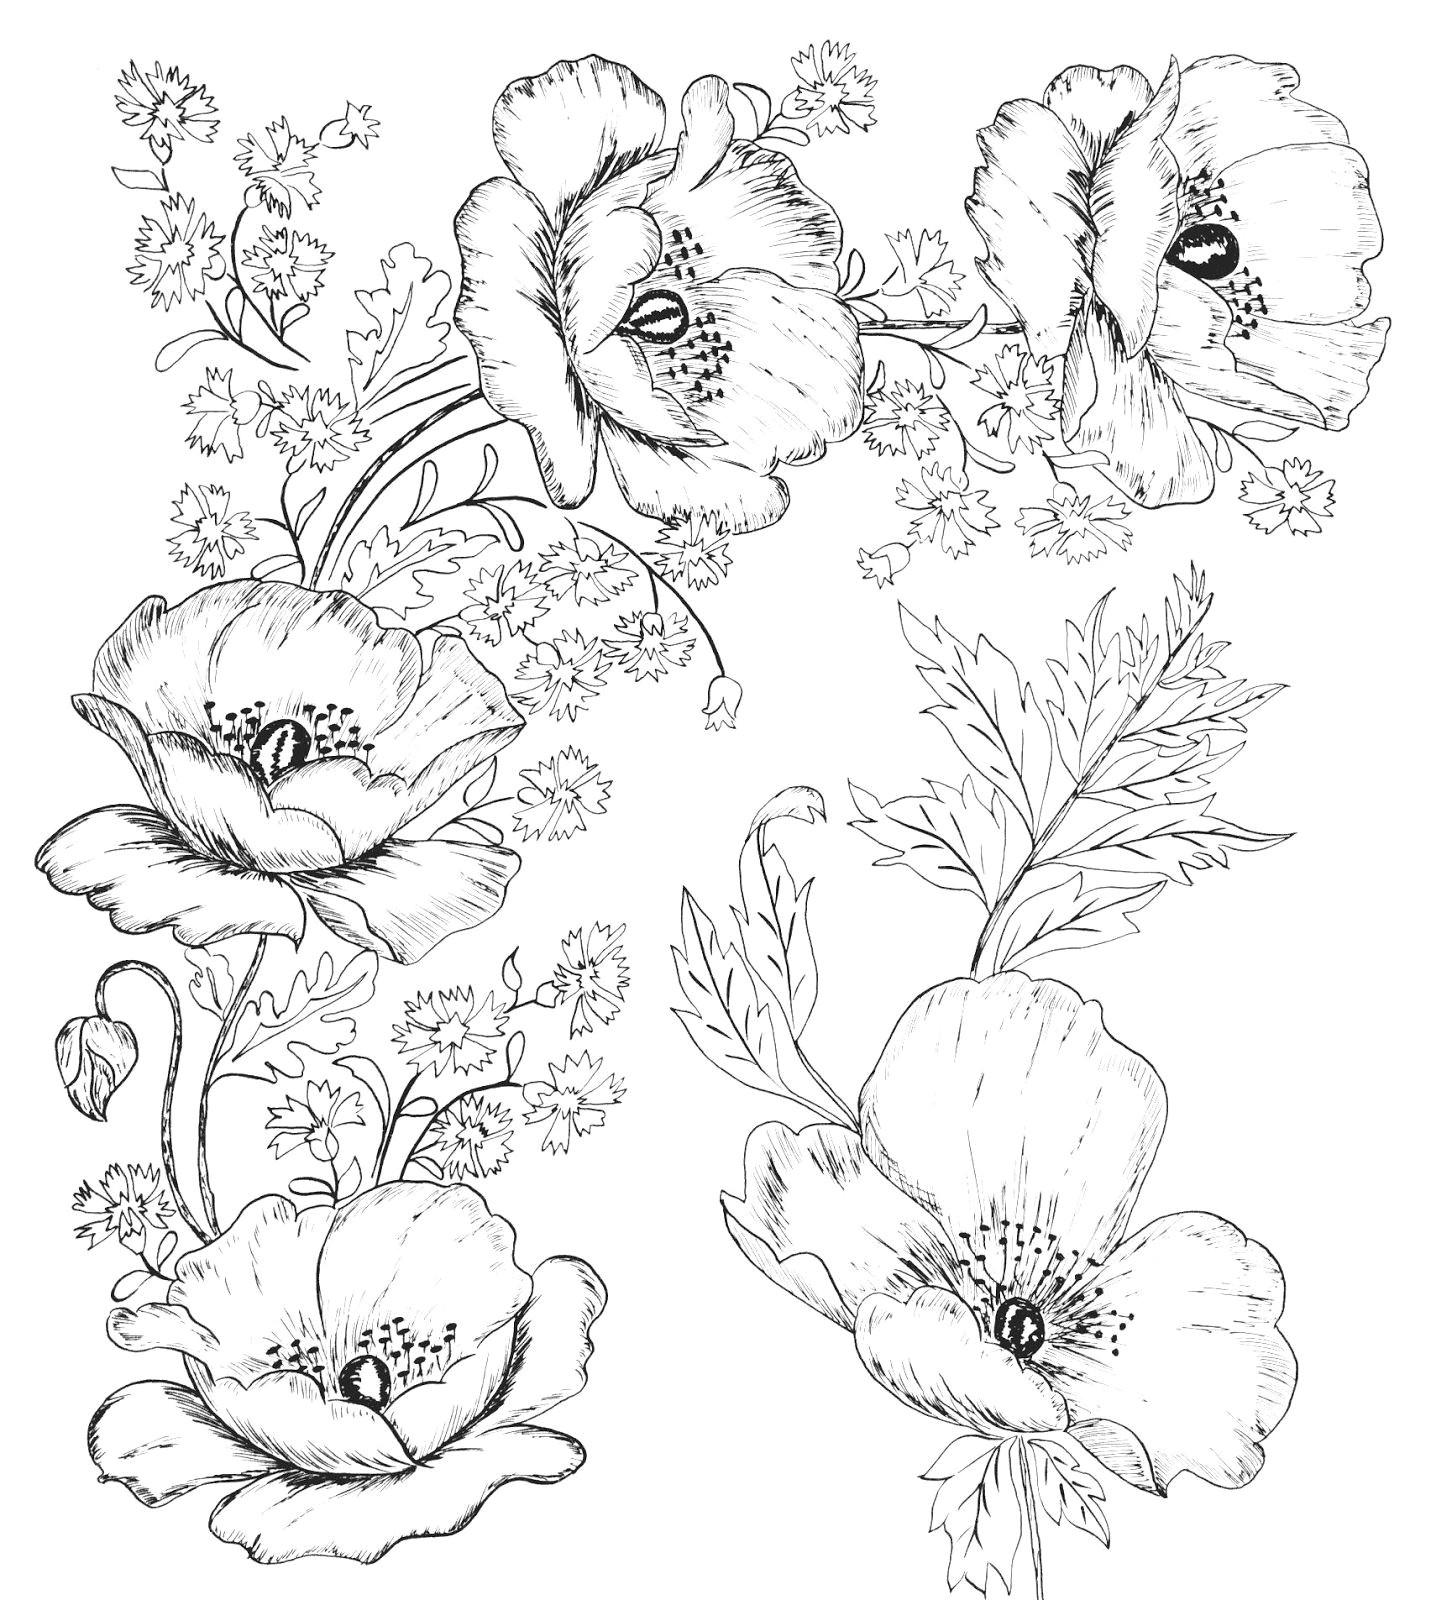 digital two for tuesday beautiful flower designs for embroidery or digital stamping